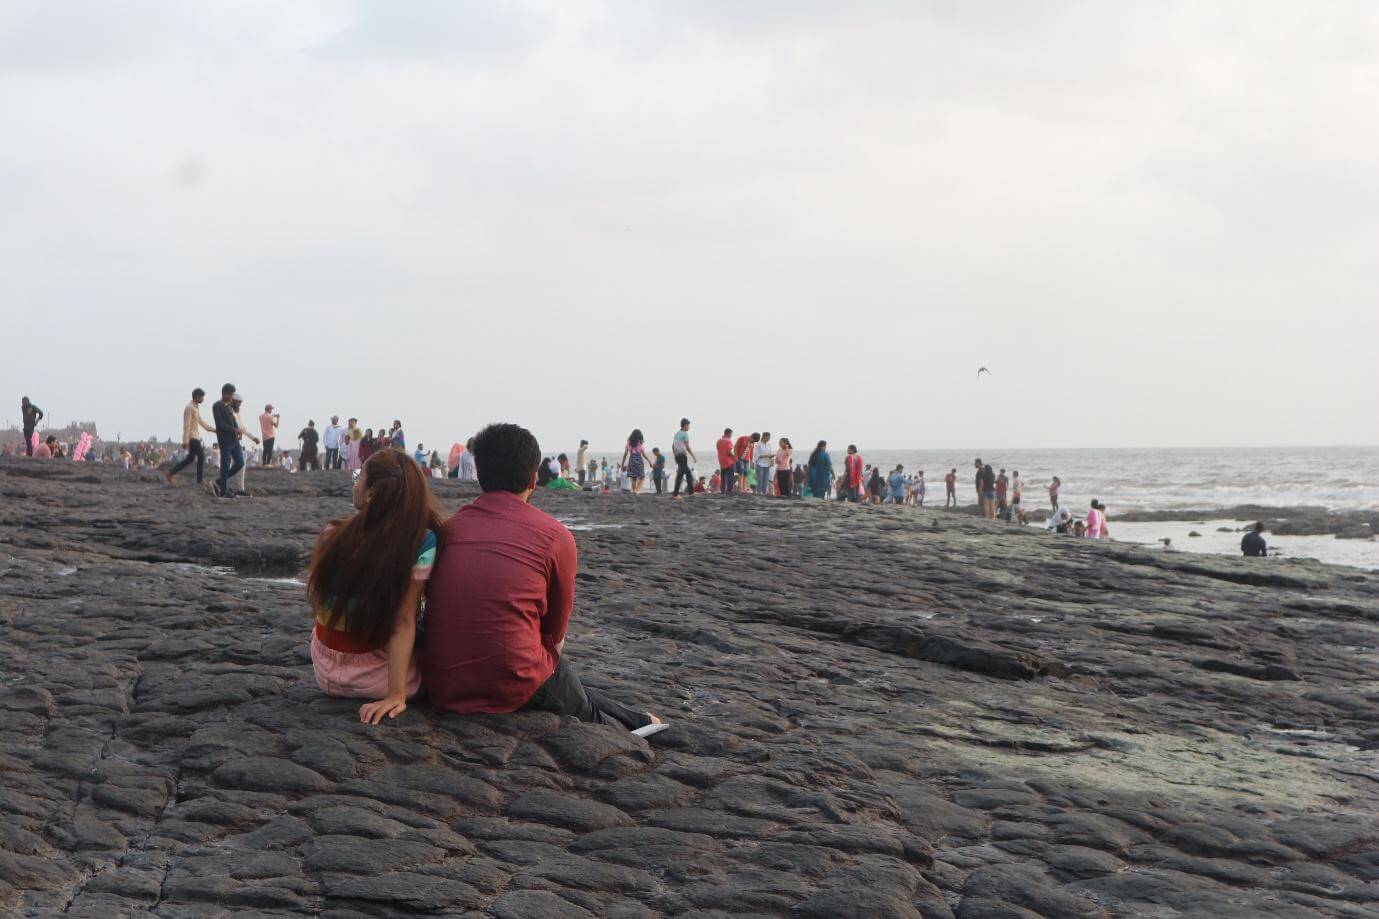 A woman and a man sit close to each other on the rocks, watching the people around them.